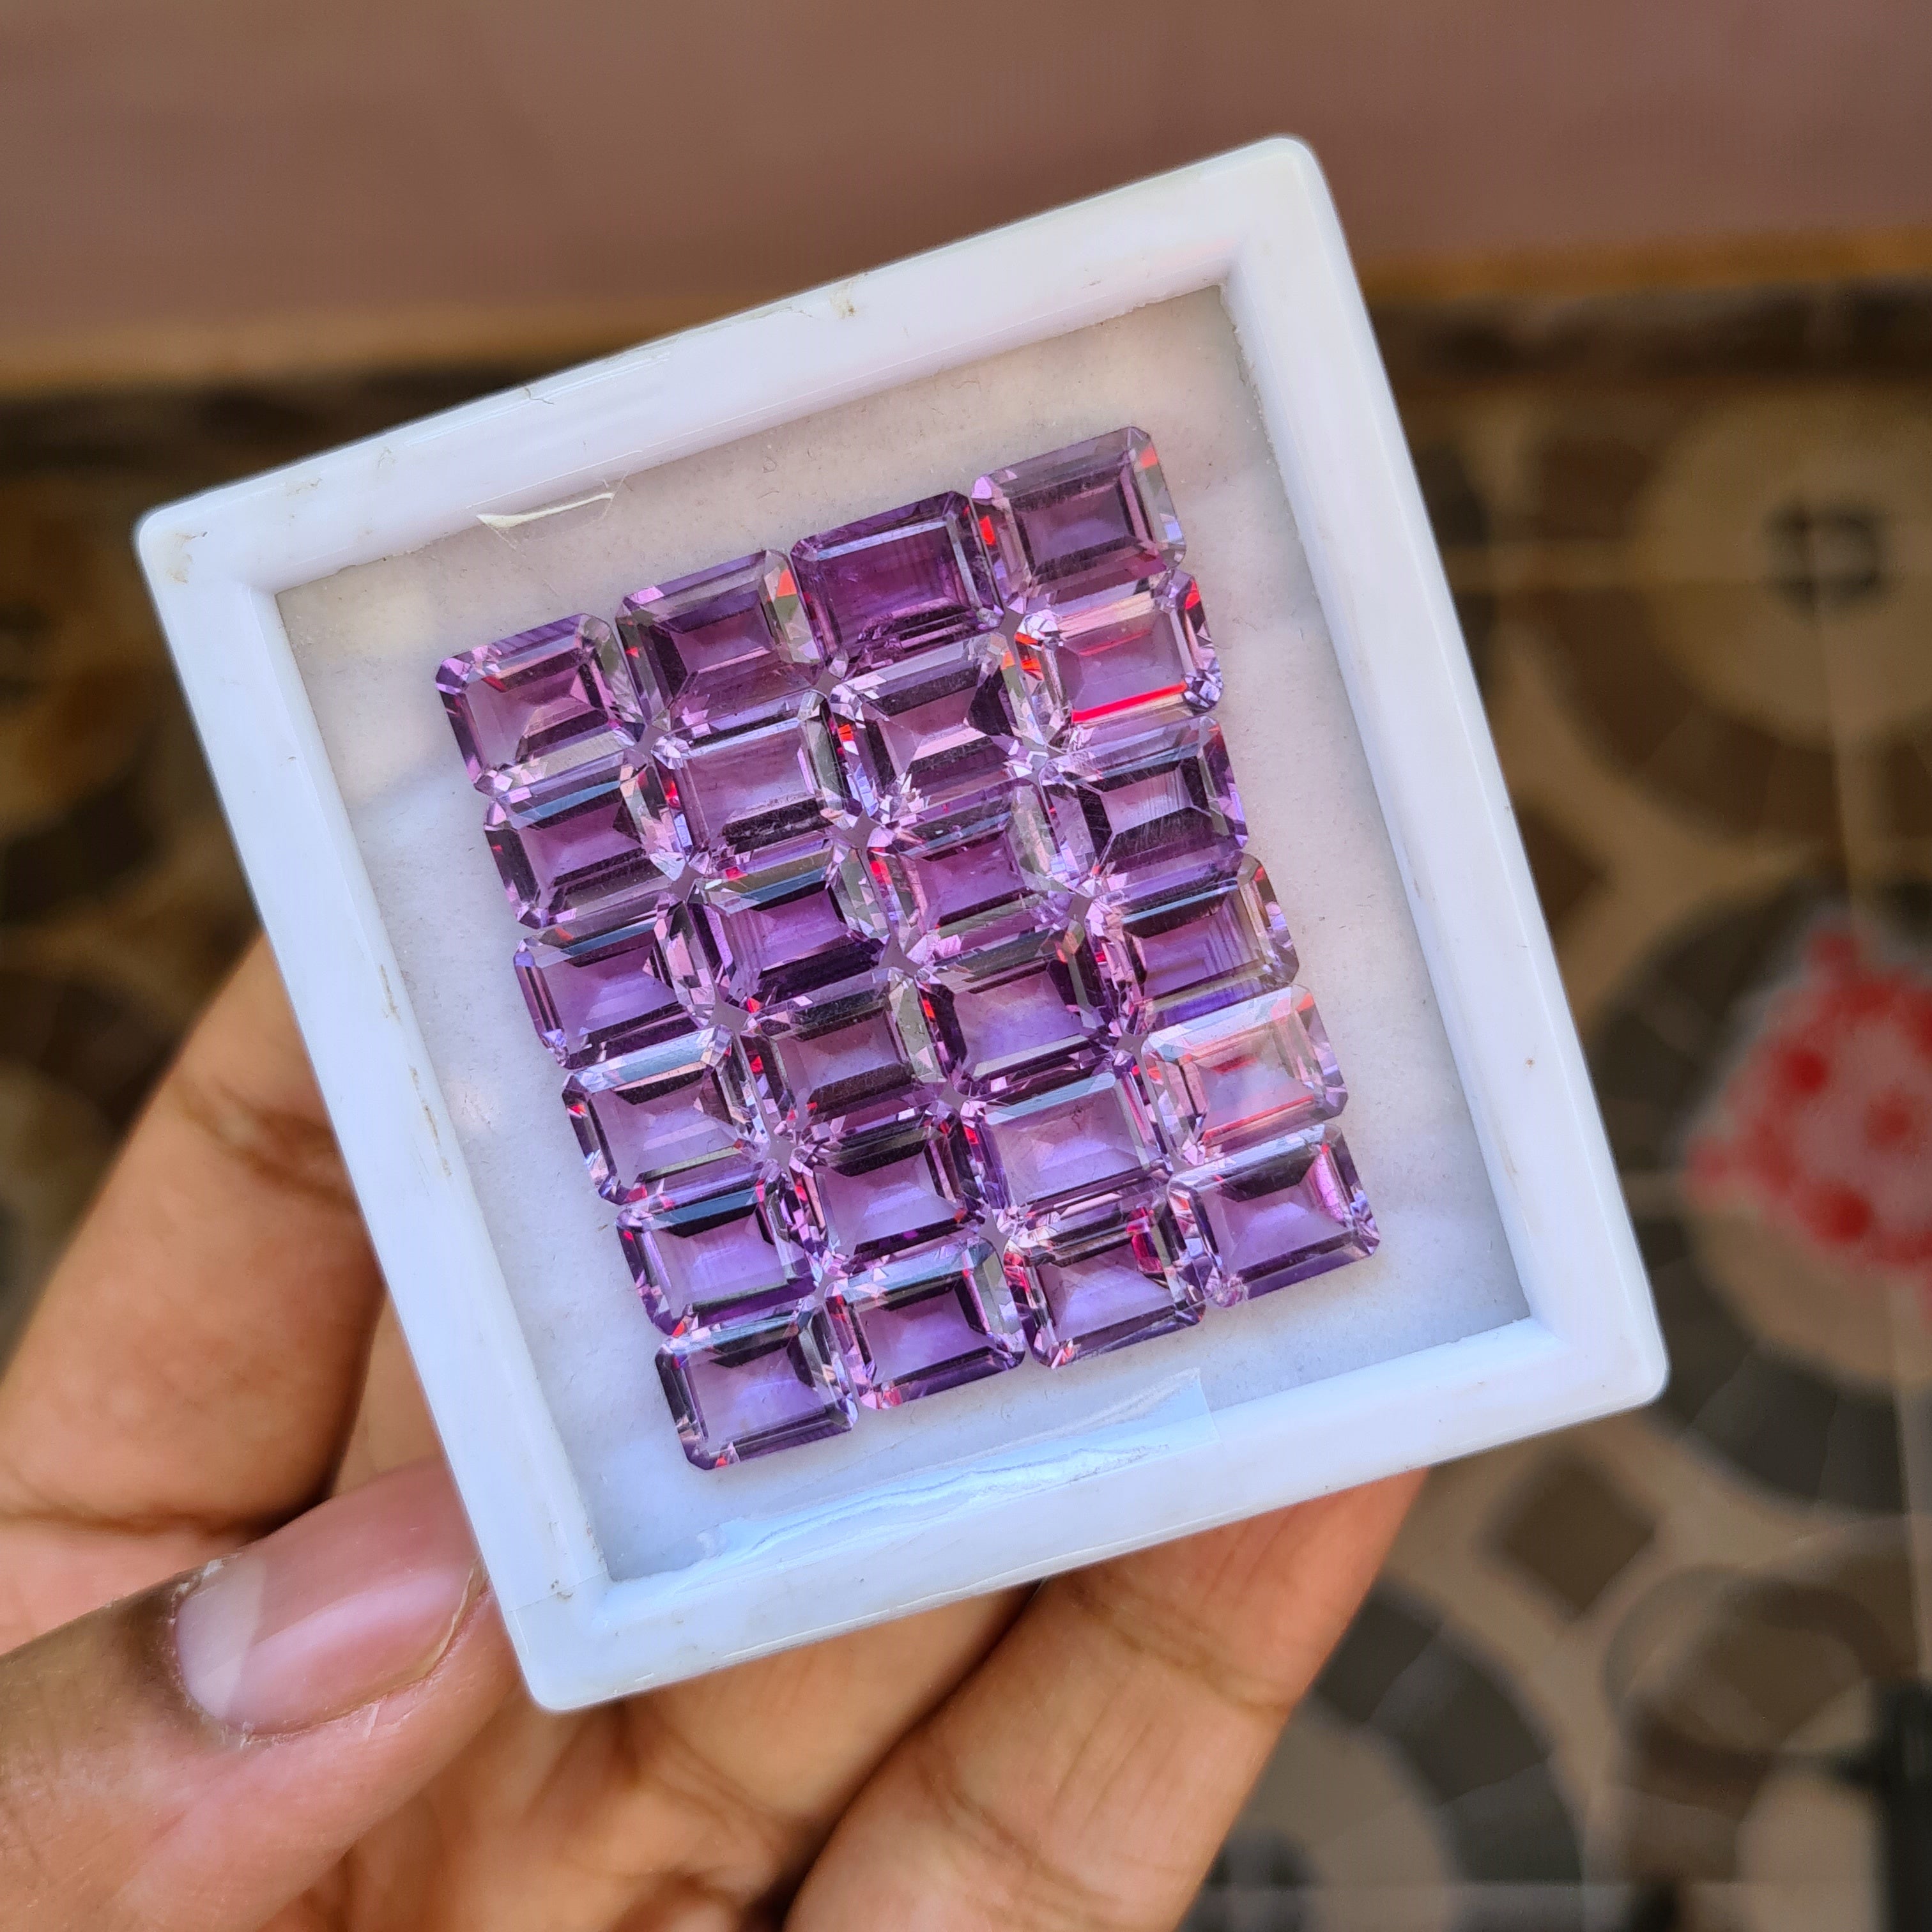 20 Pcs Natural Amethyst Rectangle Shape Faceted cut Loose Gemstone Size: 9x7mm, Natural Amethyst Faceted Cut Stone - The LabradoriteKing